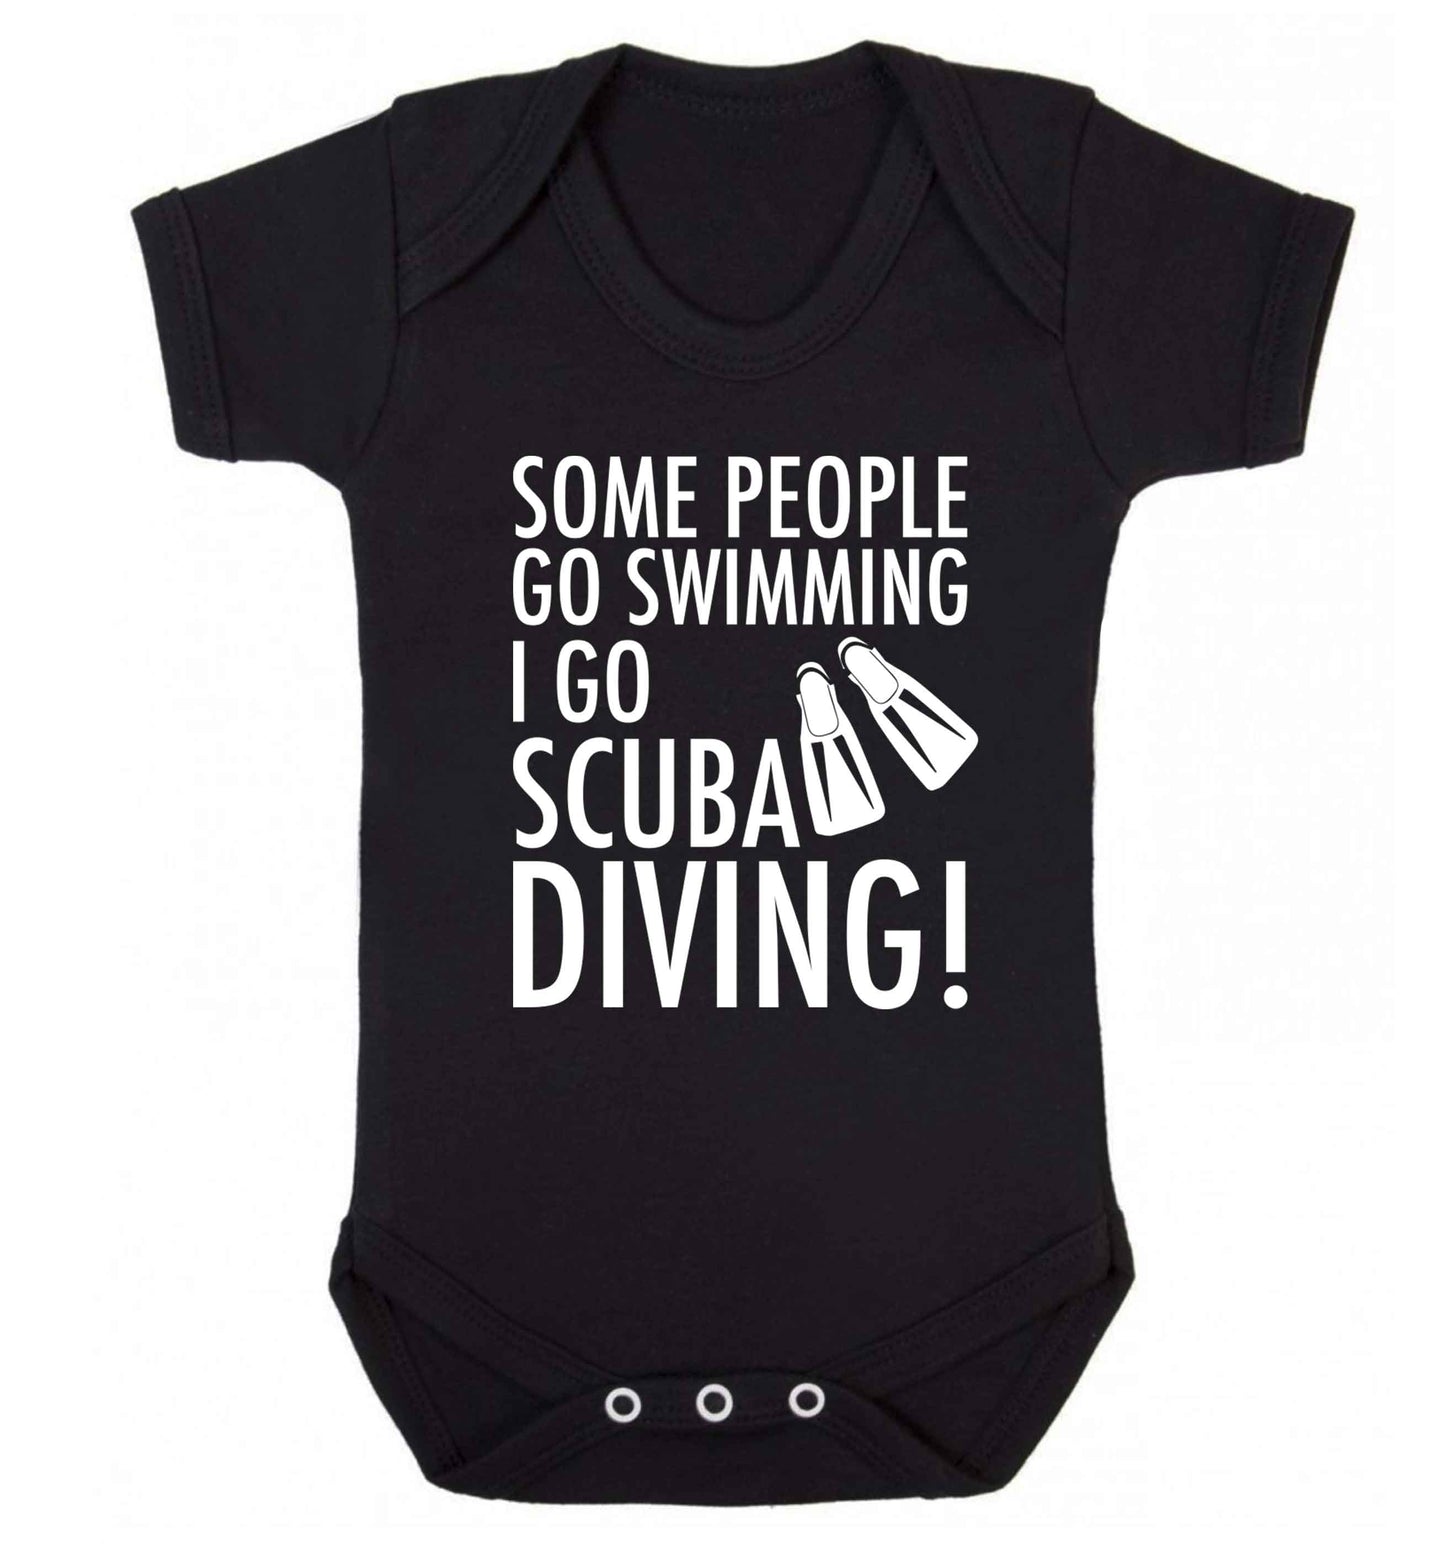 Some people go swimming I go scuba diving! Baby Vest black 18-24 months